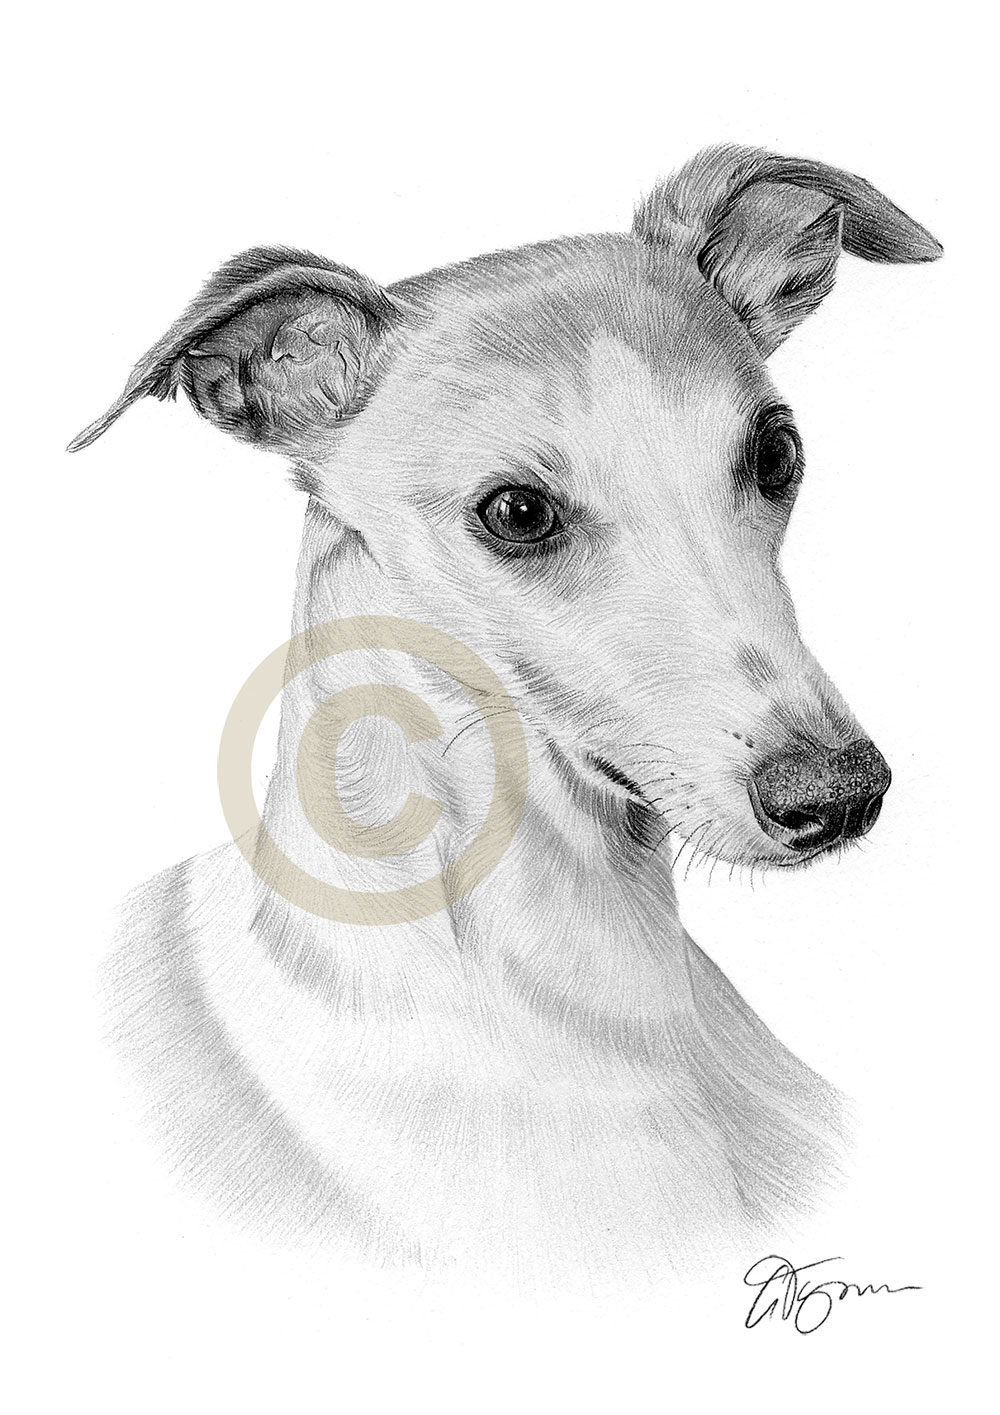 Pencil drawing commission of a whippet called Misty by artist Gary Tymon